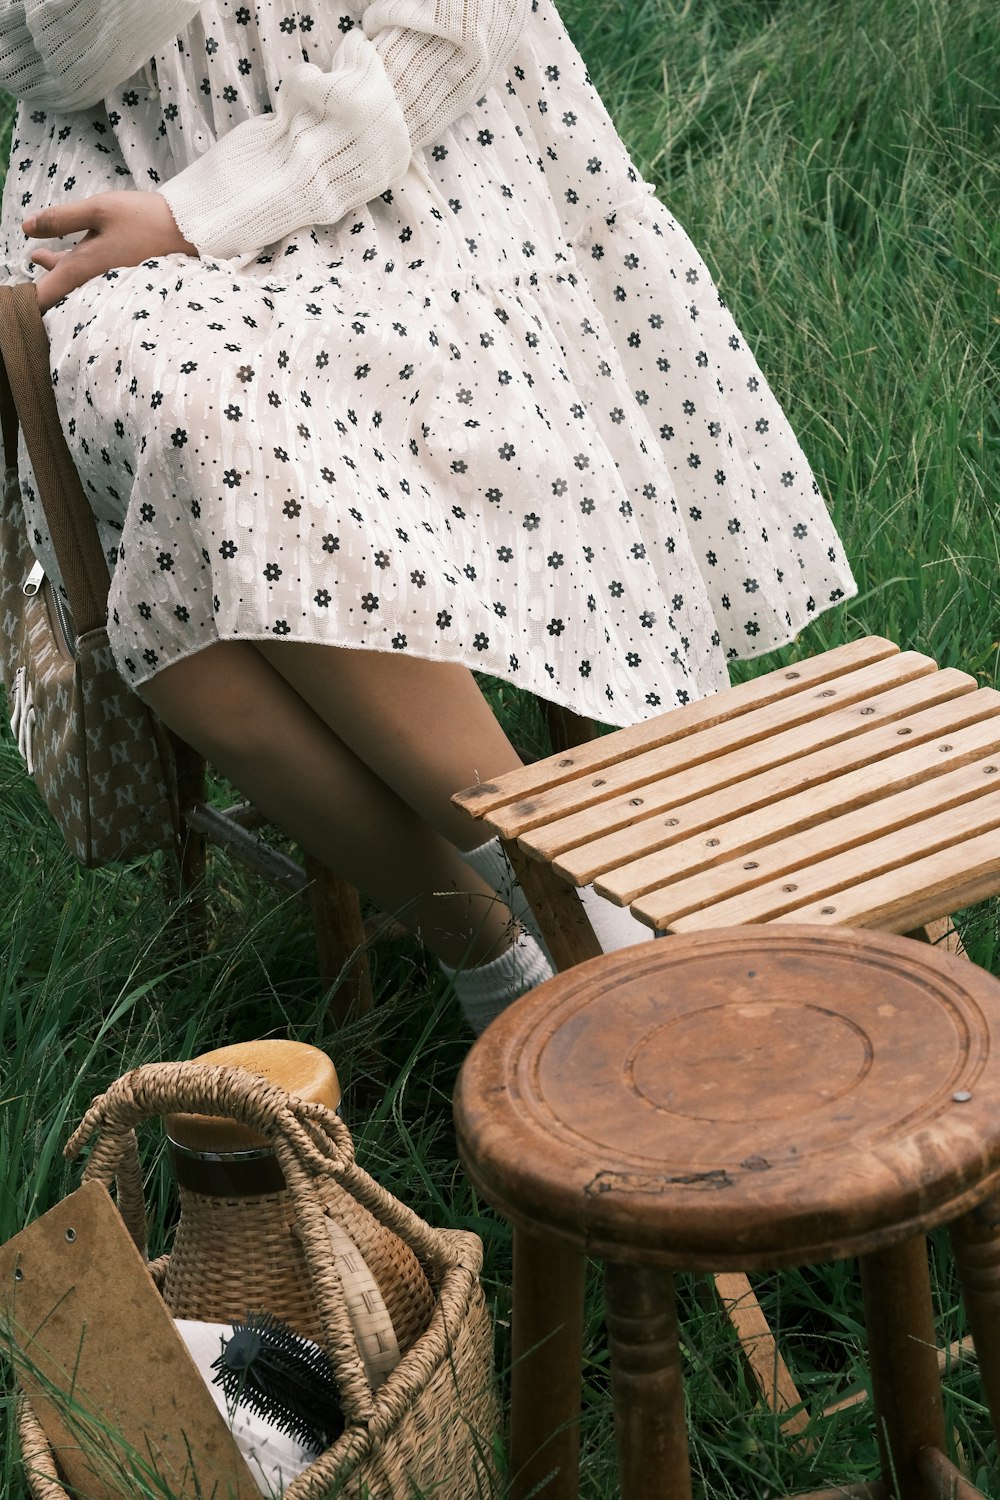 a woman sitting in a chair next to a wooden stool